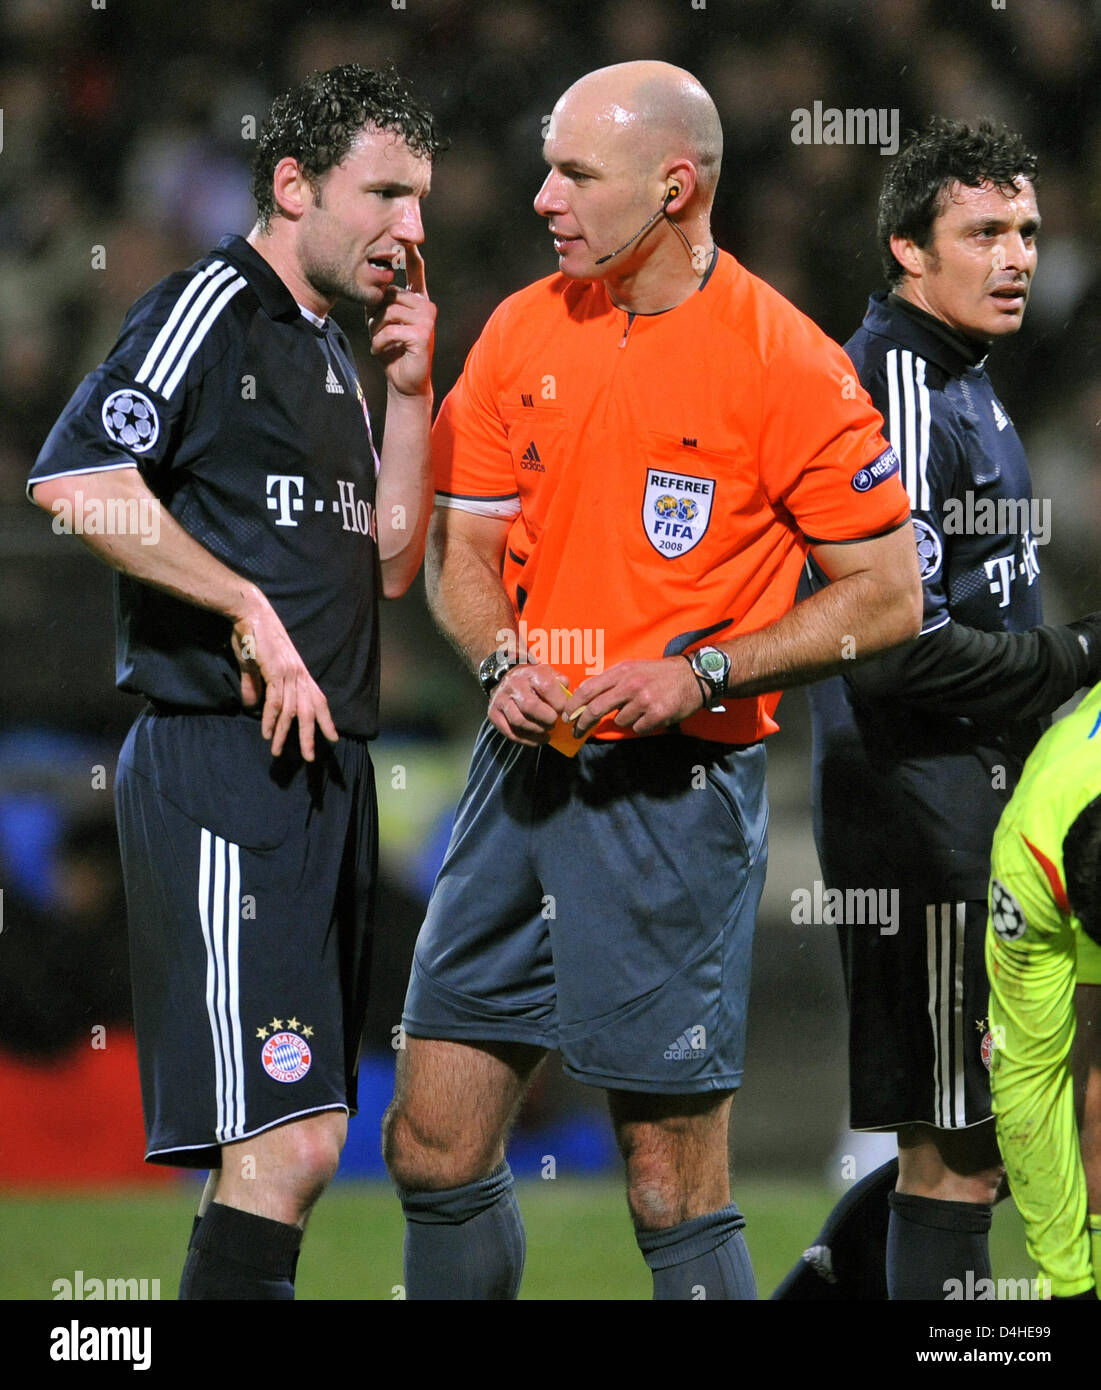 Referee Howard Webb (C) reads Munich?s skipper Mark van Bommel (L) the riot act in the Champions League Group F match Olympique Lyonnaise v FC Bayern Munich at Stade de Gerland in Lyon, France, 10 December 2008. German Bundesliga side Munich defeated French Ligue 1 side Lyon 3-2 securing the first place in UEFA Champions League Group F. Photo: Andreas Gebert Stock Photo